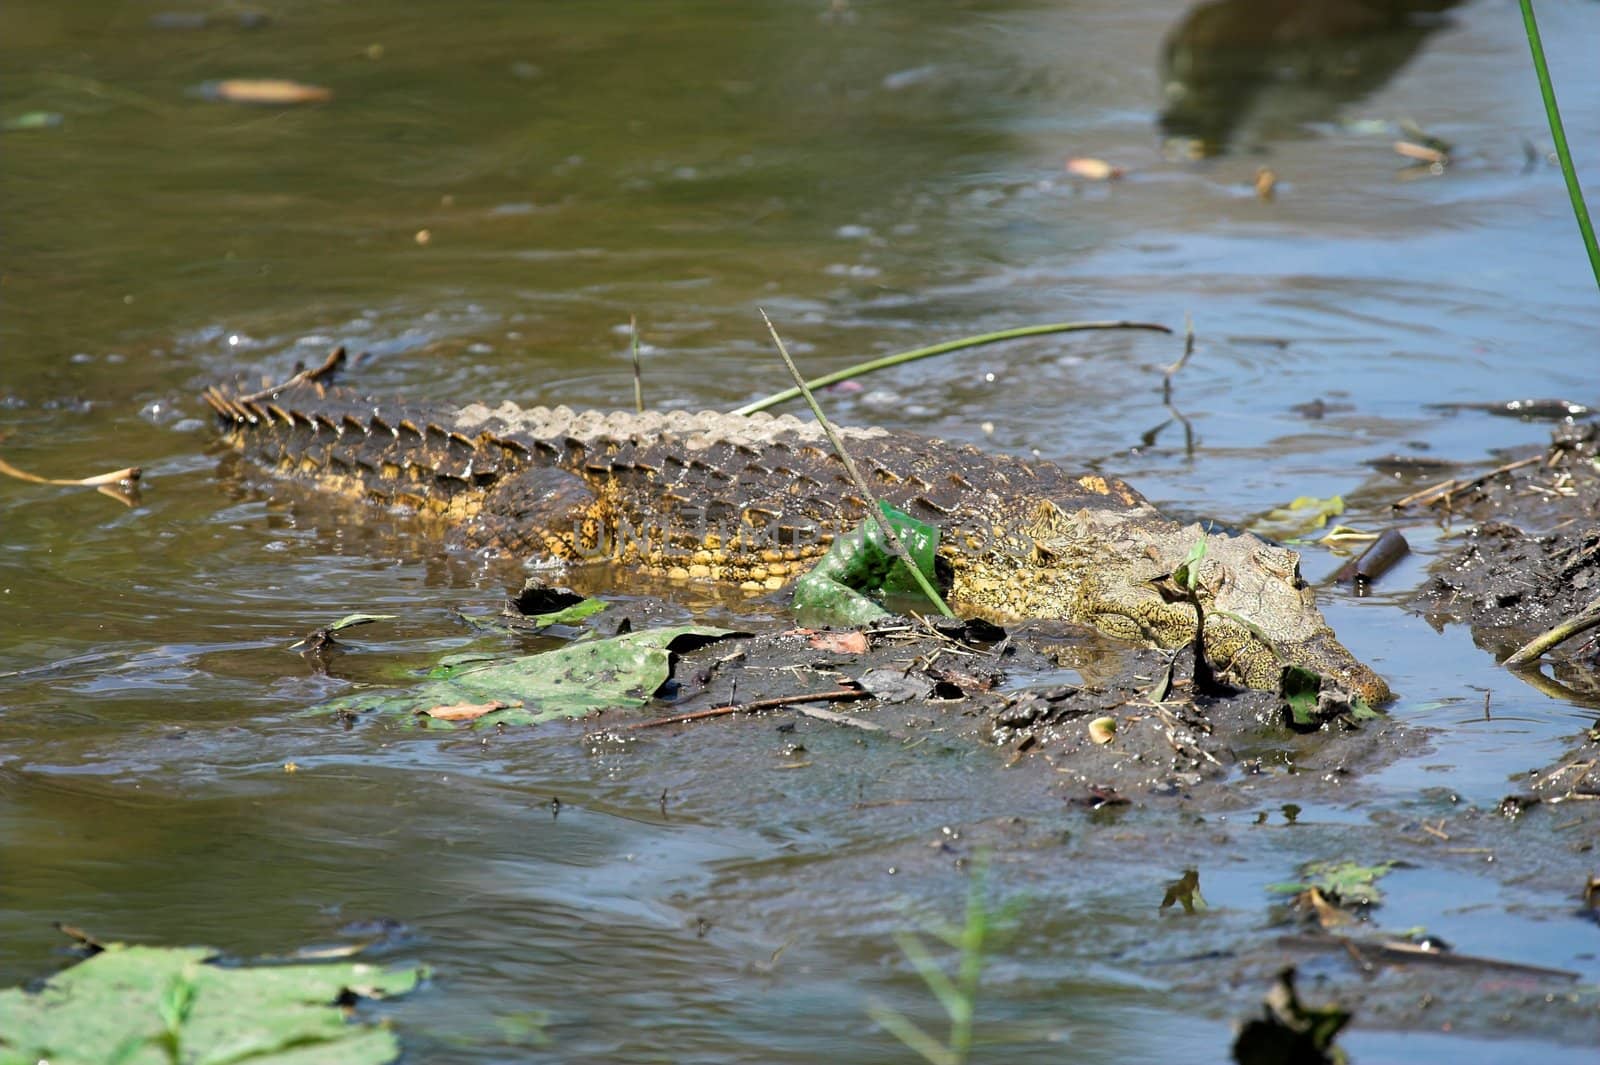 Crocodile laying in the shallow water and waiting for prey